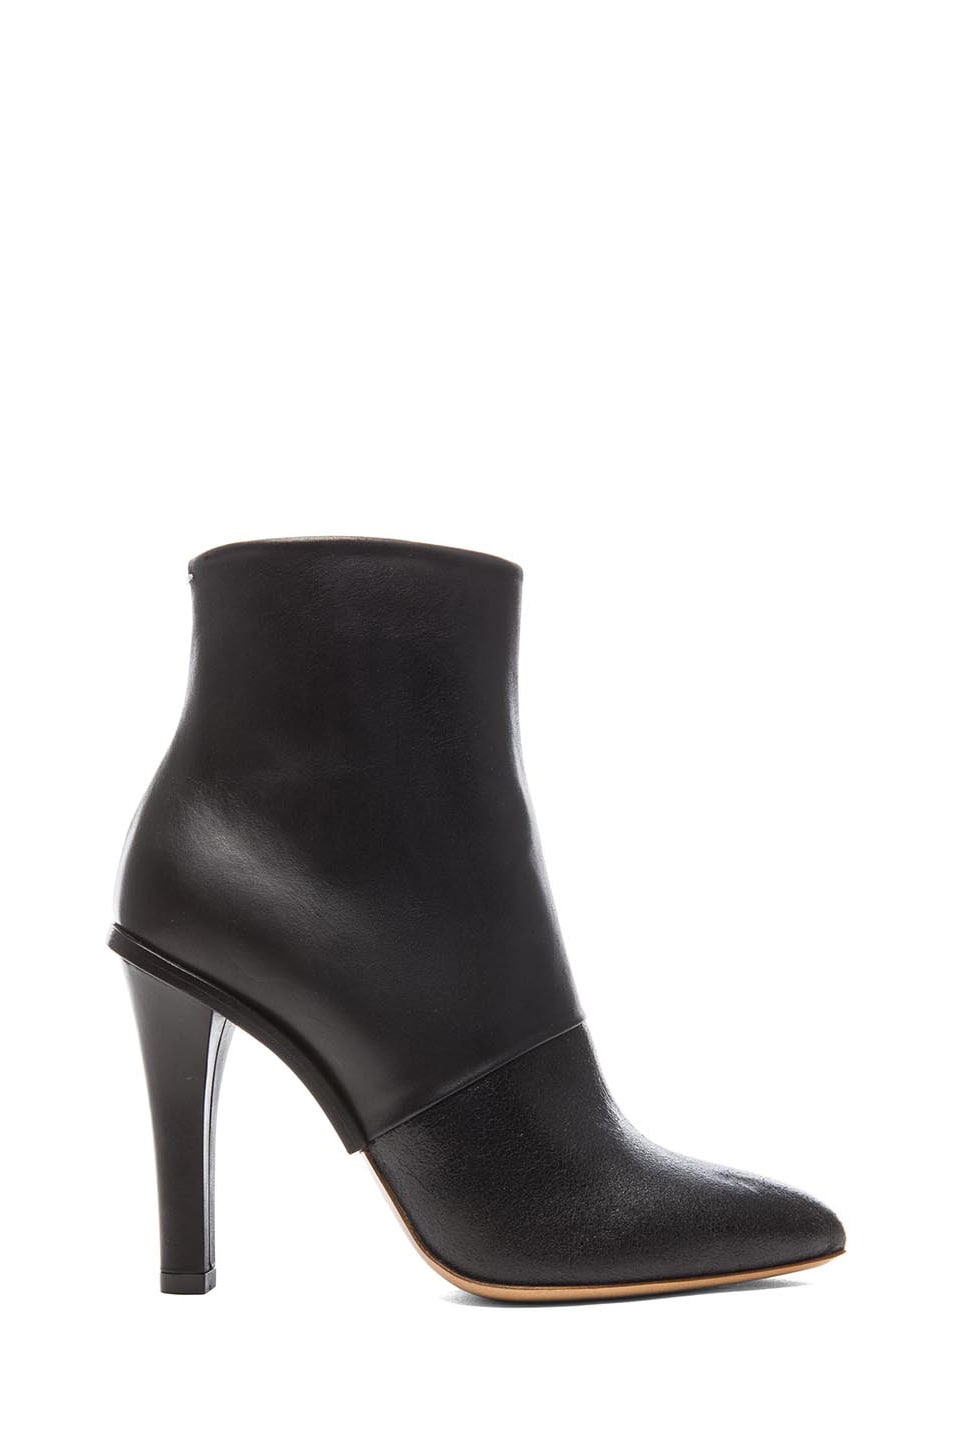 Image 1 of Maison Margiela Leather Ankle Booties in Black